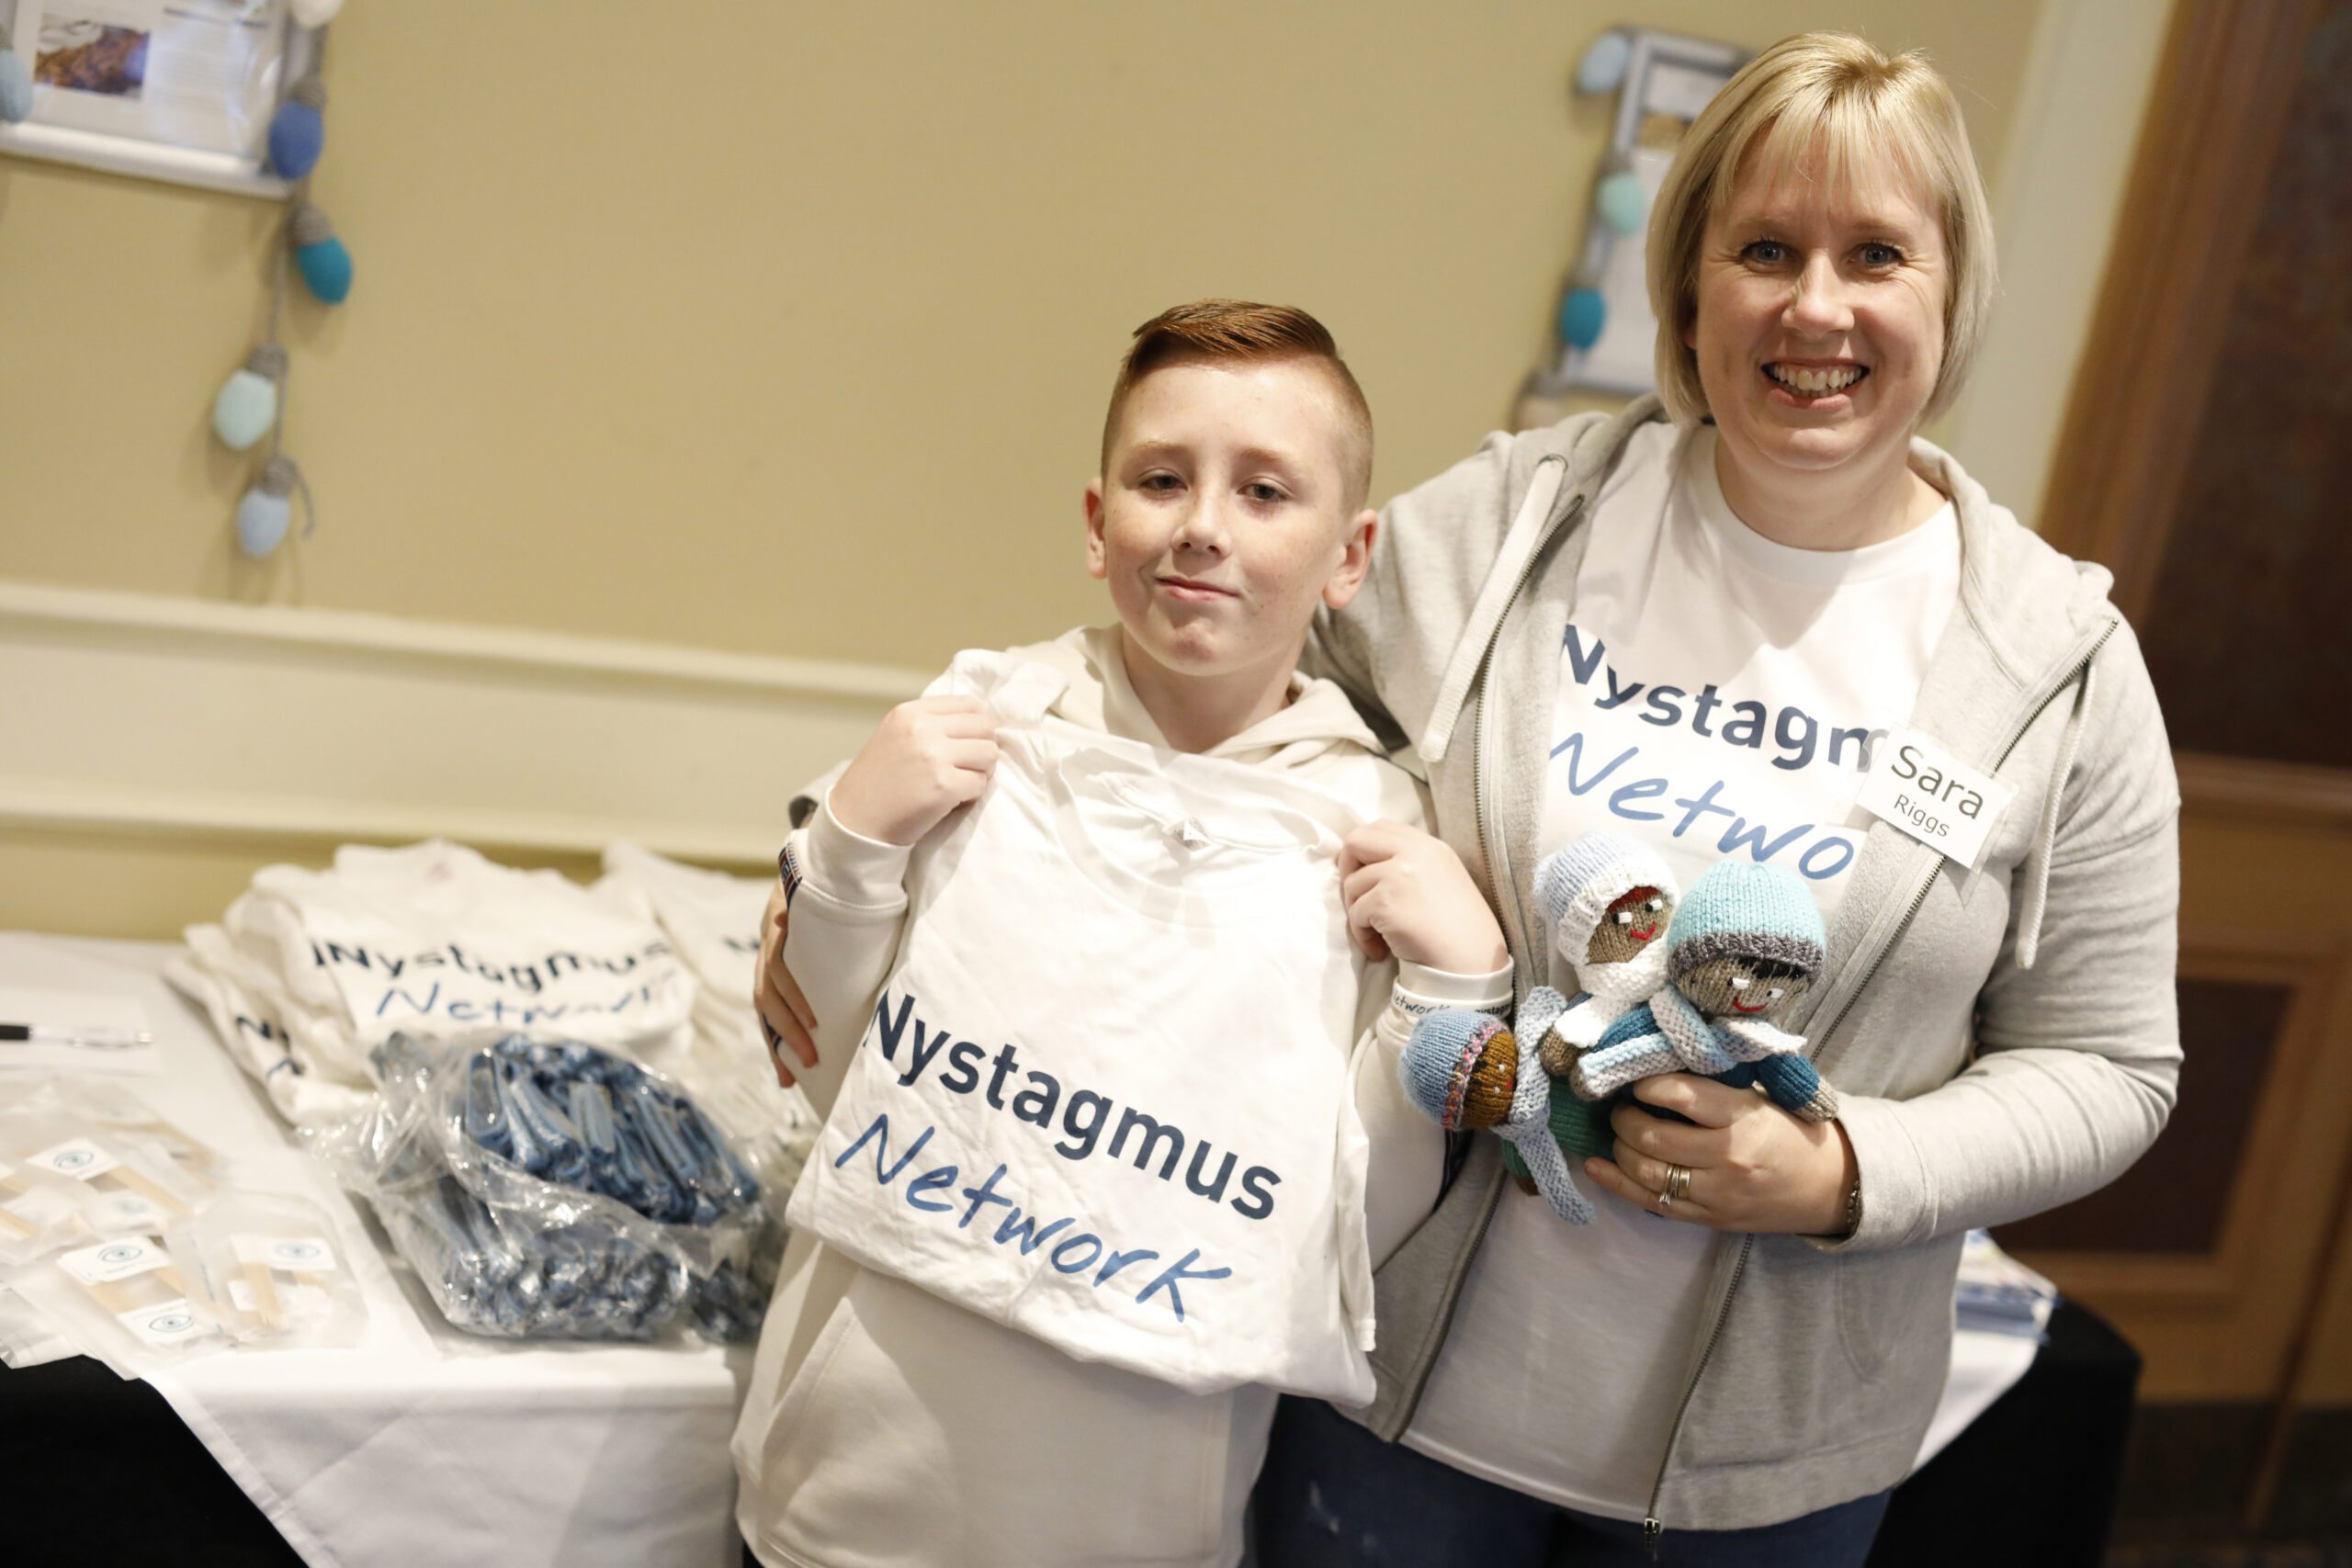 Sara and Charlie at the Nystagmus Network merchandise stall.